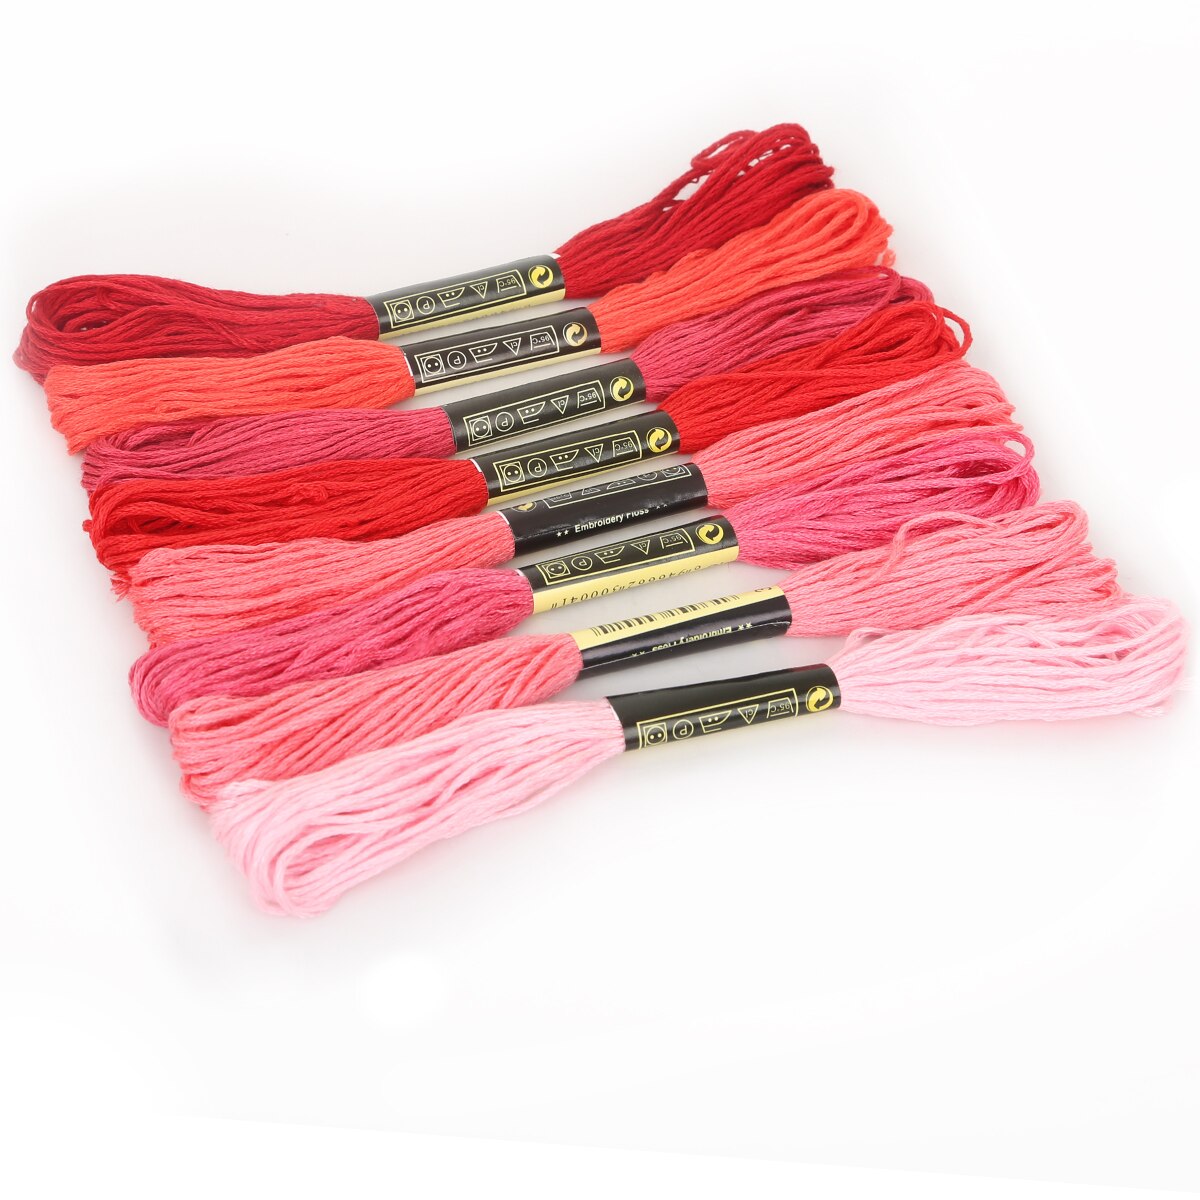 8pcs 7.5m Multiple Color Thread Cross Stitch Cotton Sewing Skeins Craft Embroidery Thread Floss Kit DIY Sewing Tools Accessories: Red